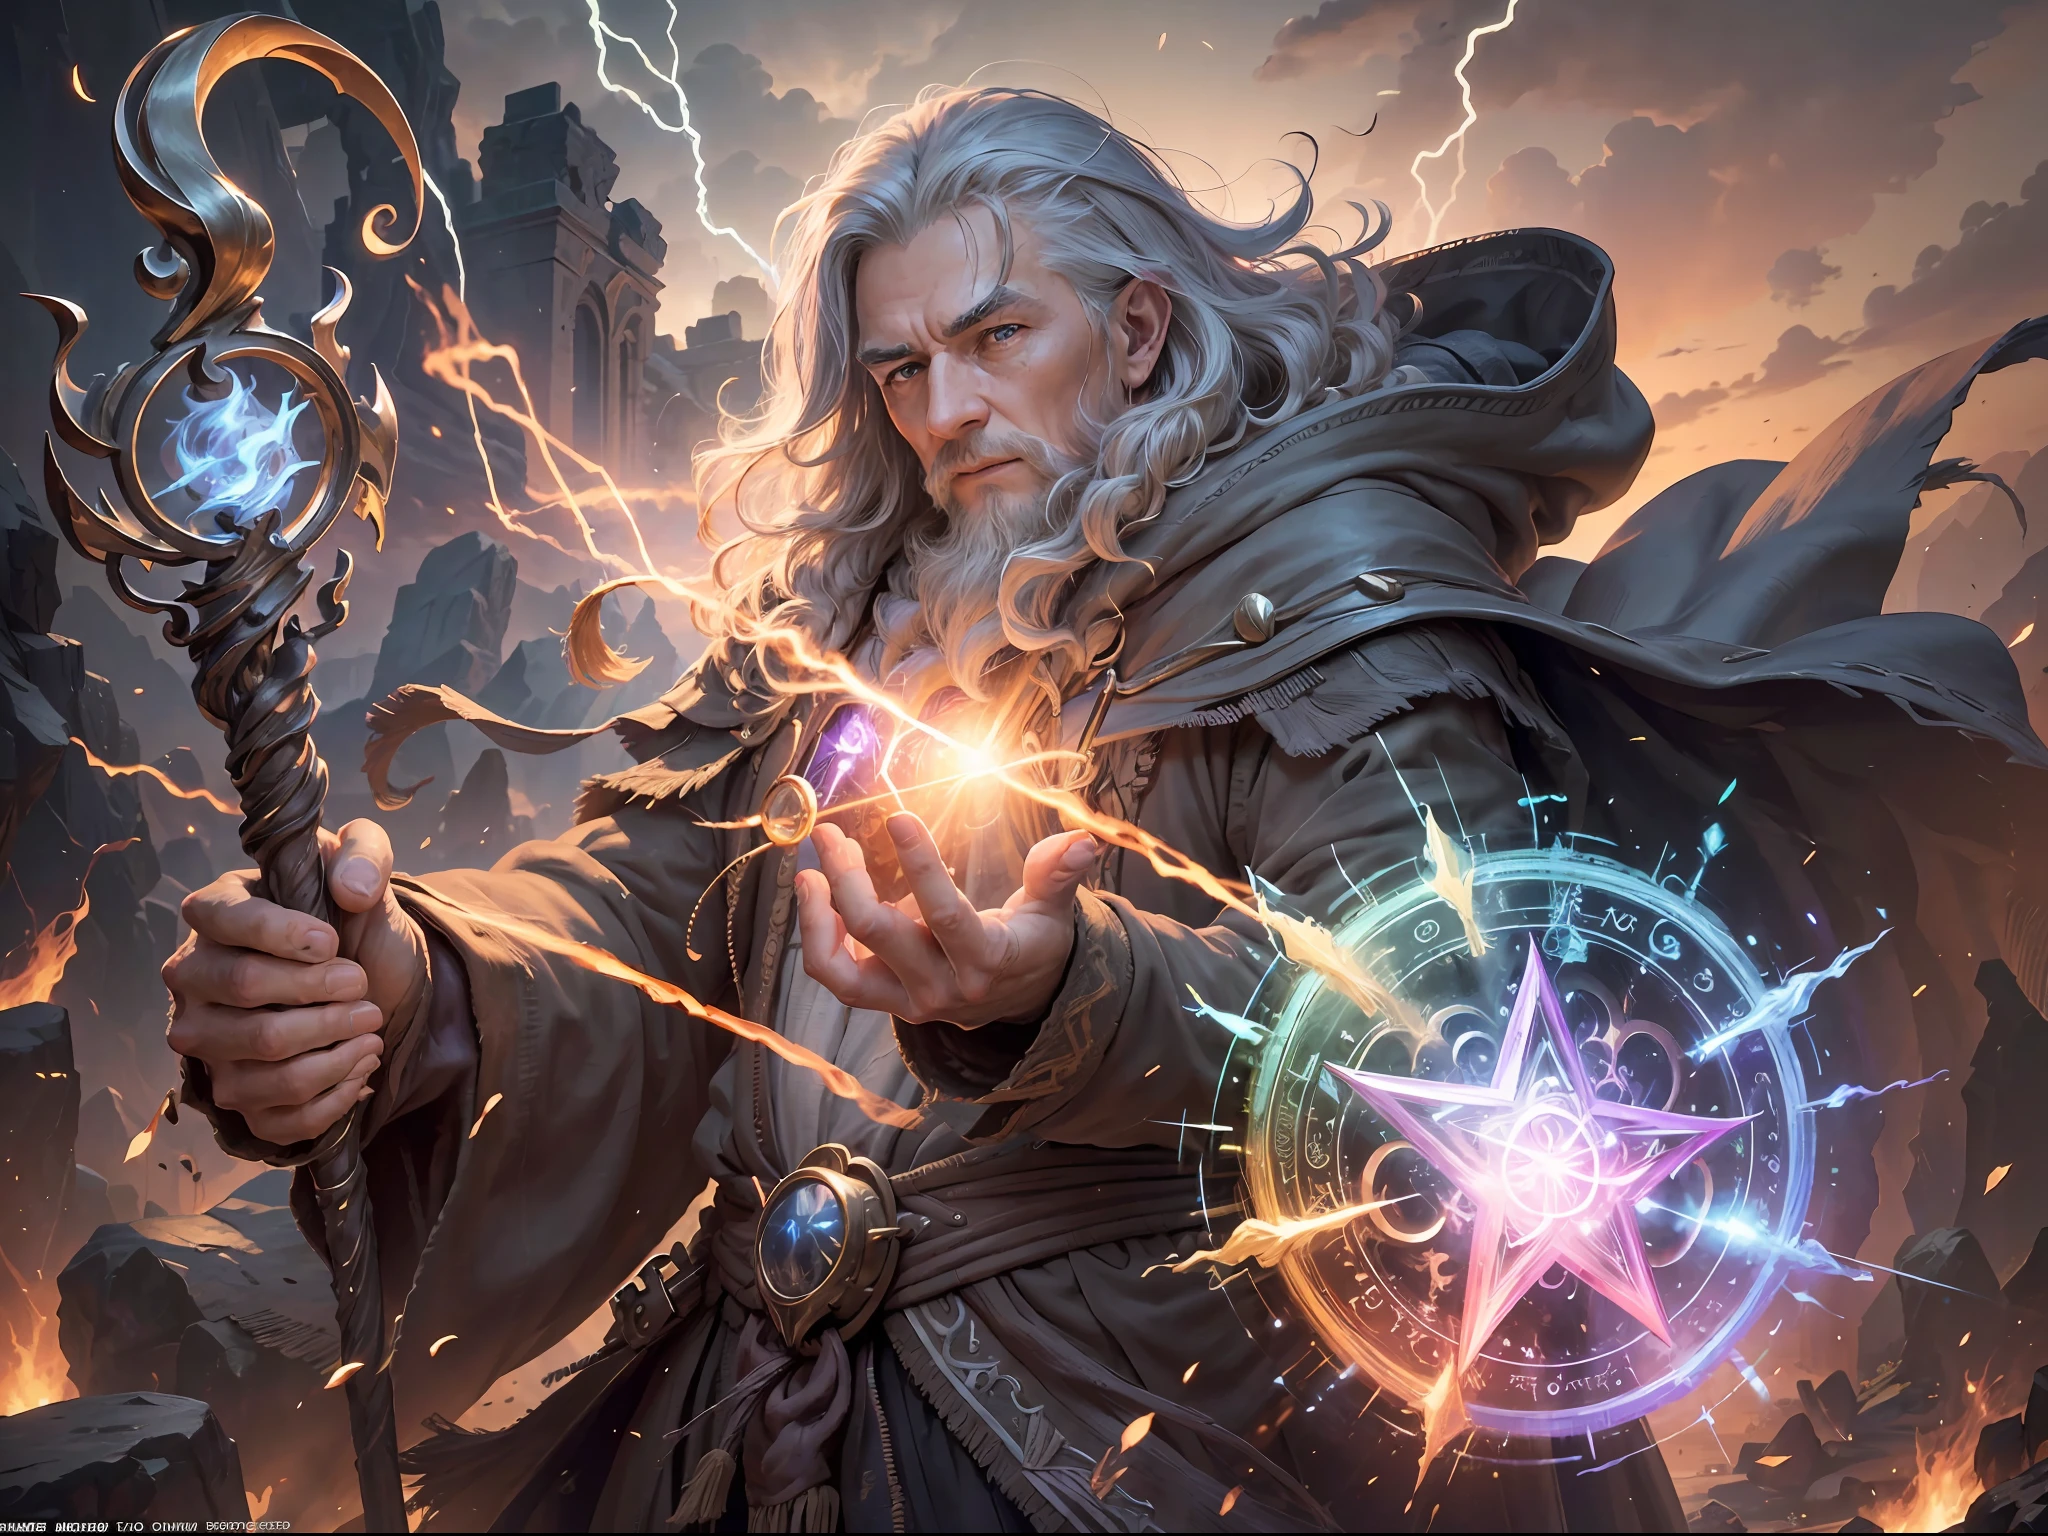 (masterpiece, high resolution, mystical:1.2), a powerful and aged mage stands at the precipice of casting a devastating area-of-effect spell. The mage is surrounded by intricate magic circles, pulsating with arcane energy, as he performs intricate hand gestures towards the symbols. With a long flowing robe and a staff adorned with ancient runes, he emanates an aura of wisdom and mastery over the mystical arts. The scene is set against a breathtaking sunset, casting a warm golden glow over the mage and his surroundings. The clouds in the sky reflect hues of purple and orange, creating a captivating backdrop for the mage's arcane display. As he channels his magical energy, wisps of energy radiate from his fingertips, crackling with power. The image captures the essence of a seasoned mage harnessing the forces of magic to unleash a potent spell, as the world around him is bathed in the twilight of the setting sun. With the use of depth of field (DOF), super-resolution, and high megapixel rendering, every element comes to life with cinematic lightning and anti-aliasing techniques like FKAA, TXAA, and RTX. The addition of SSAO (Screen Space Ambient Occlusion) and various post-processing effects in both post-production and tone mapping elevate the visual quality to a whole new level. With the use of depth of field (DOF), super-resolution, and high megapixel rendering, every element comes to life with cinematic lightning and anti-aliasing techniques like FKAA, TXAA, and RTX. The addition of SSAO (Screen Space Ambient Occlusion) and various post-processing effects in both post-production and tone mapping elevate the visual quality to a whole new level.